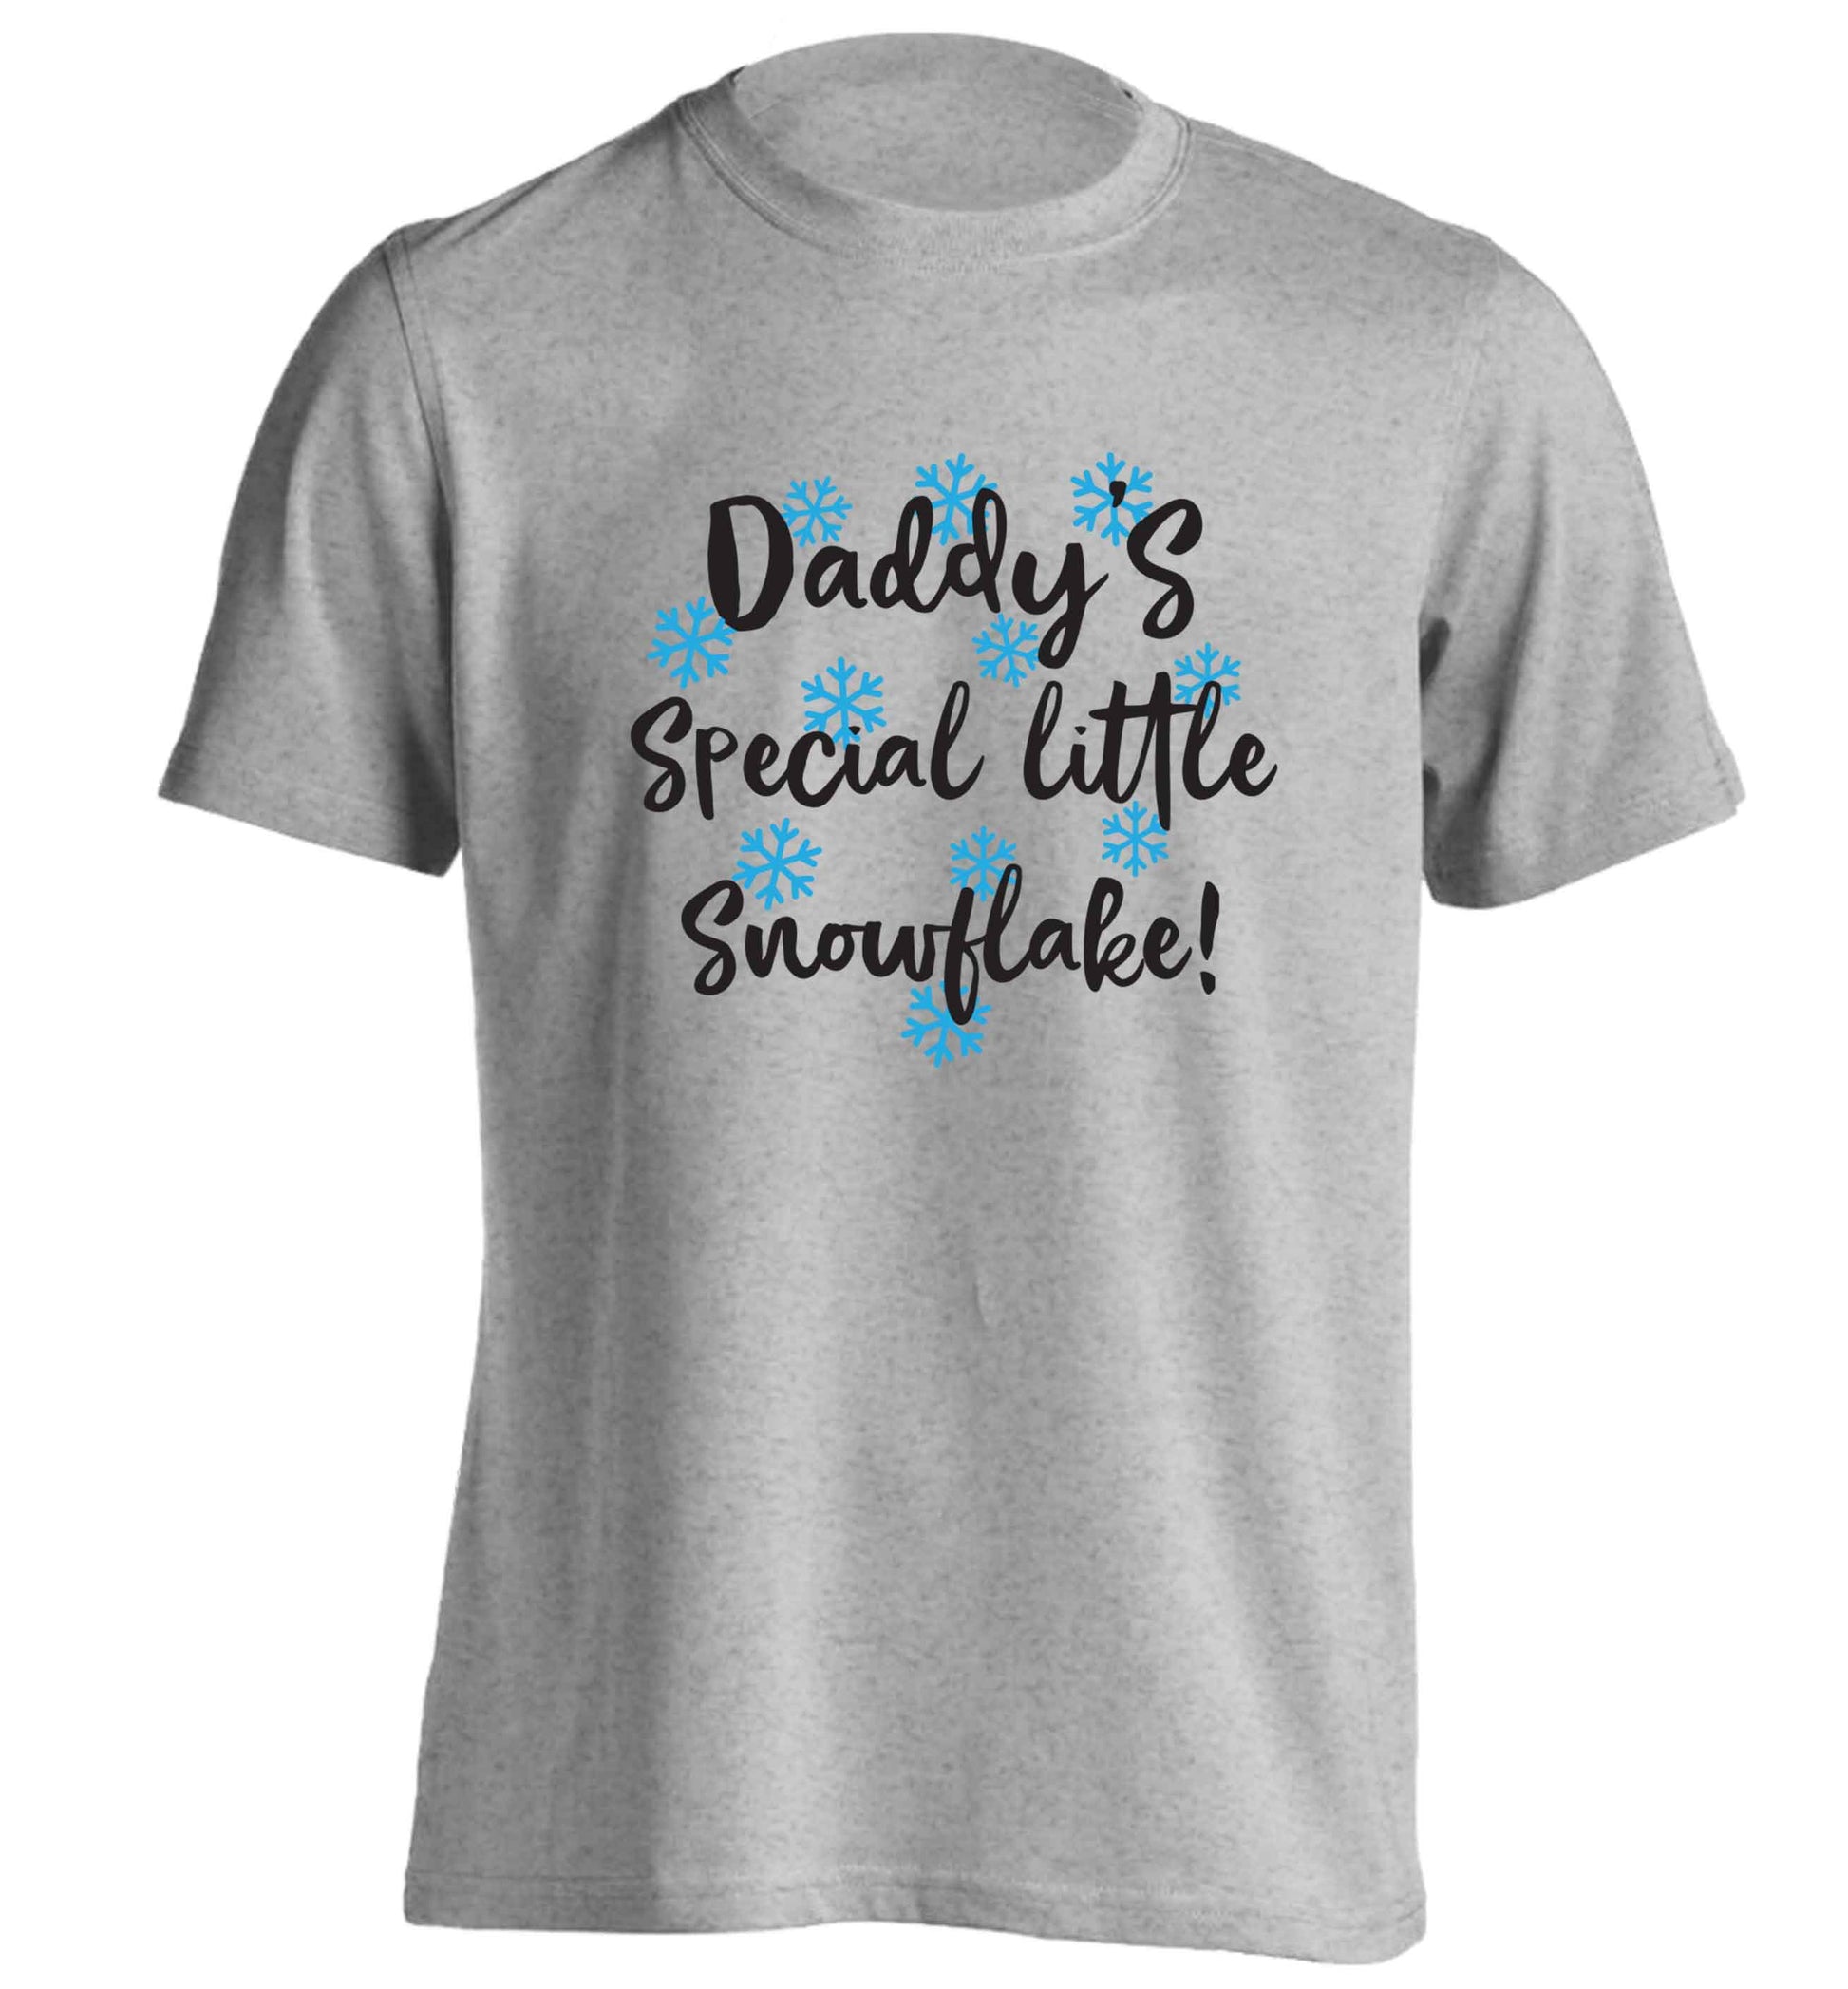 Daddy's special little snowflake adults unisex grey Tshirt 2XL